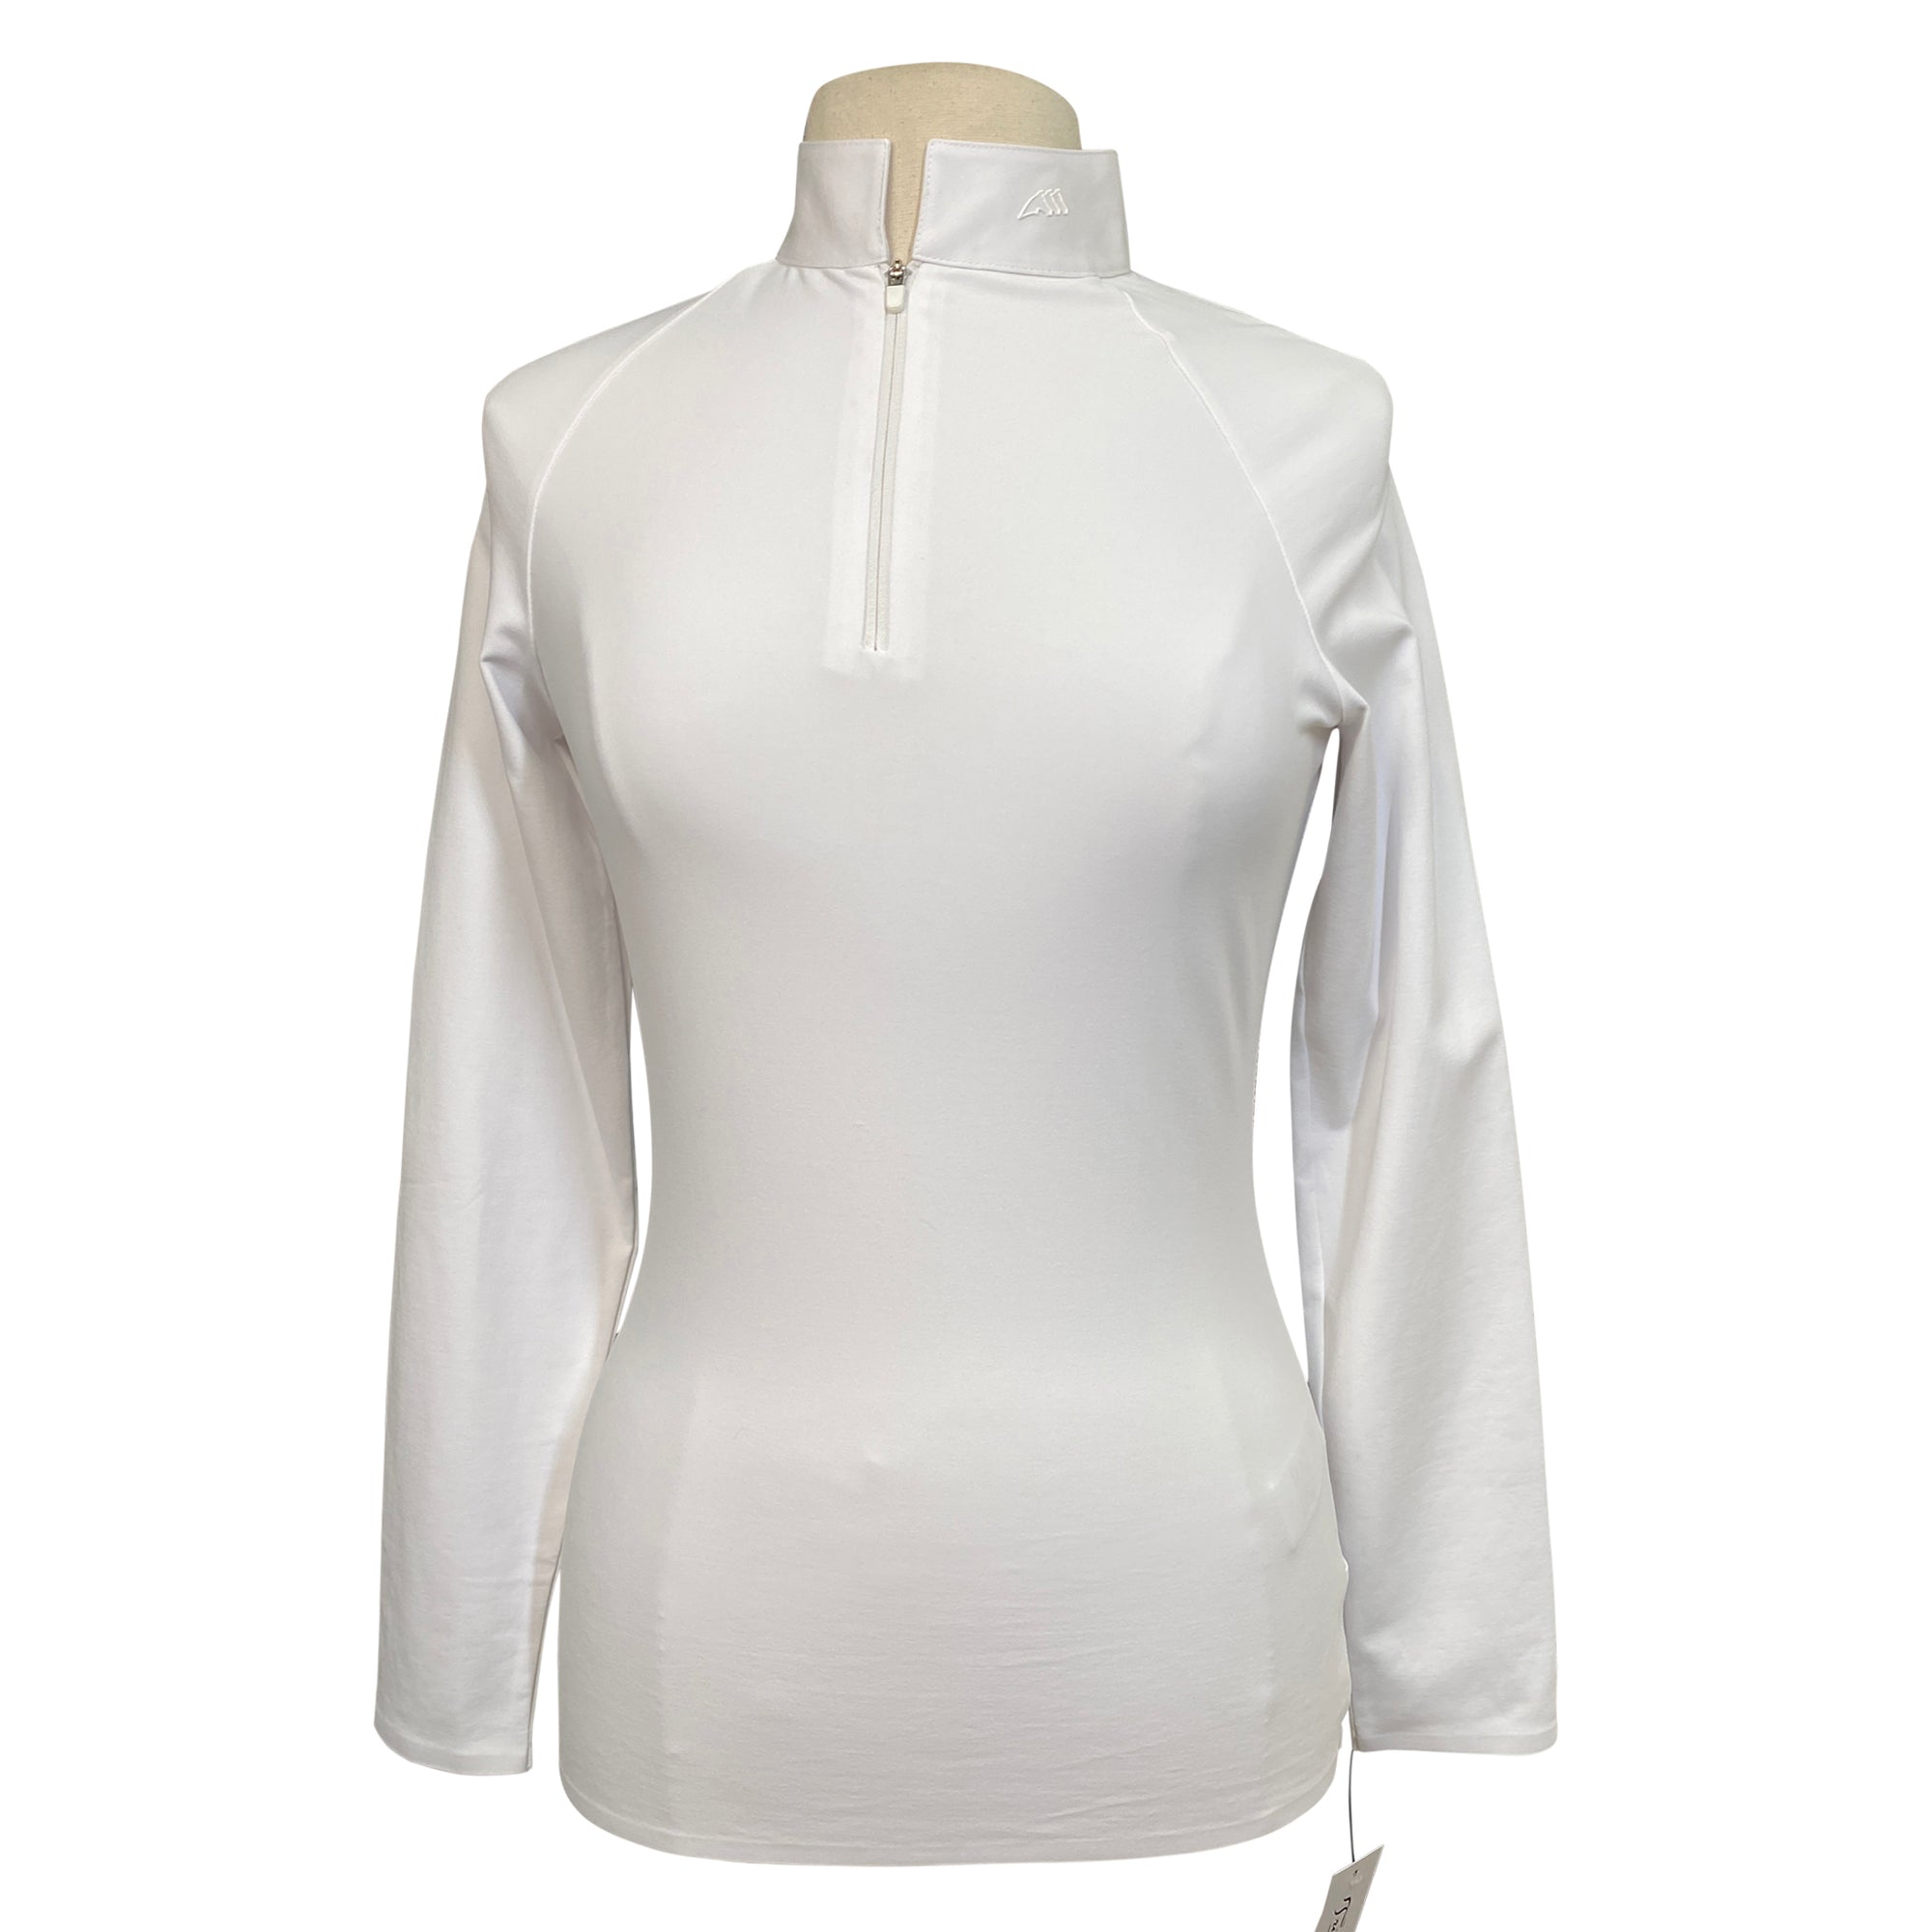 Equiline Long Sleeve Competition Shirt in White